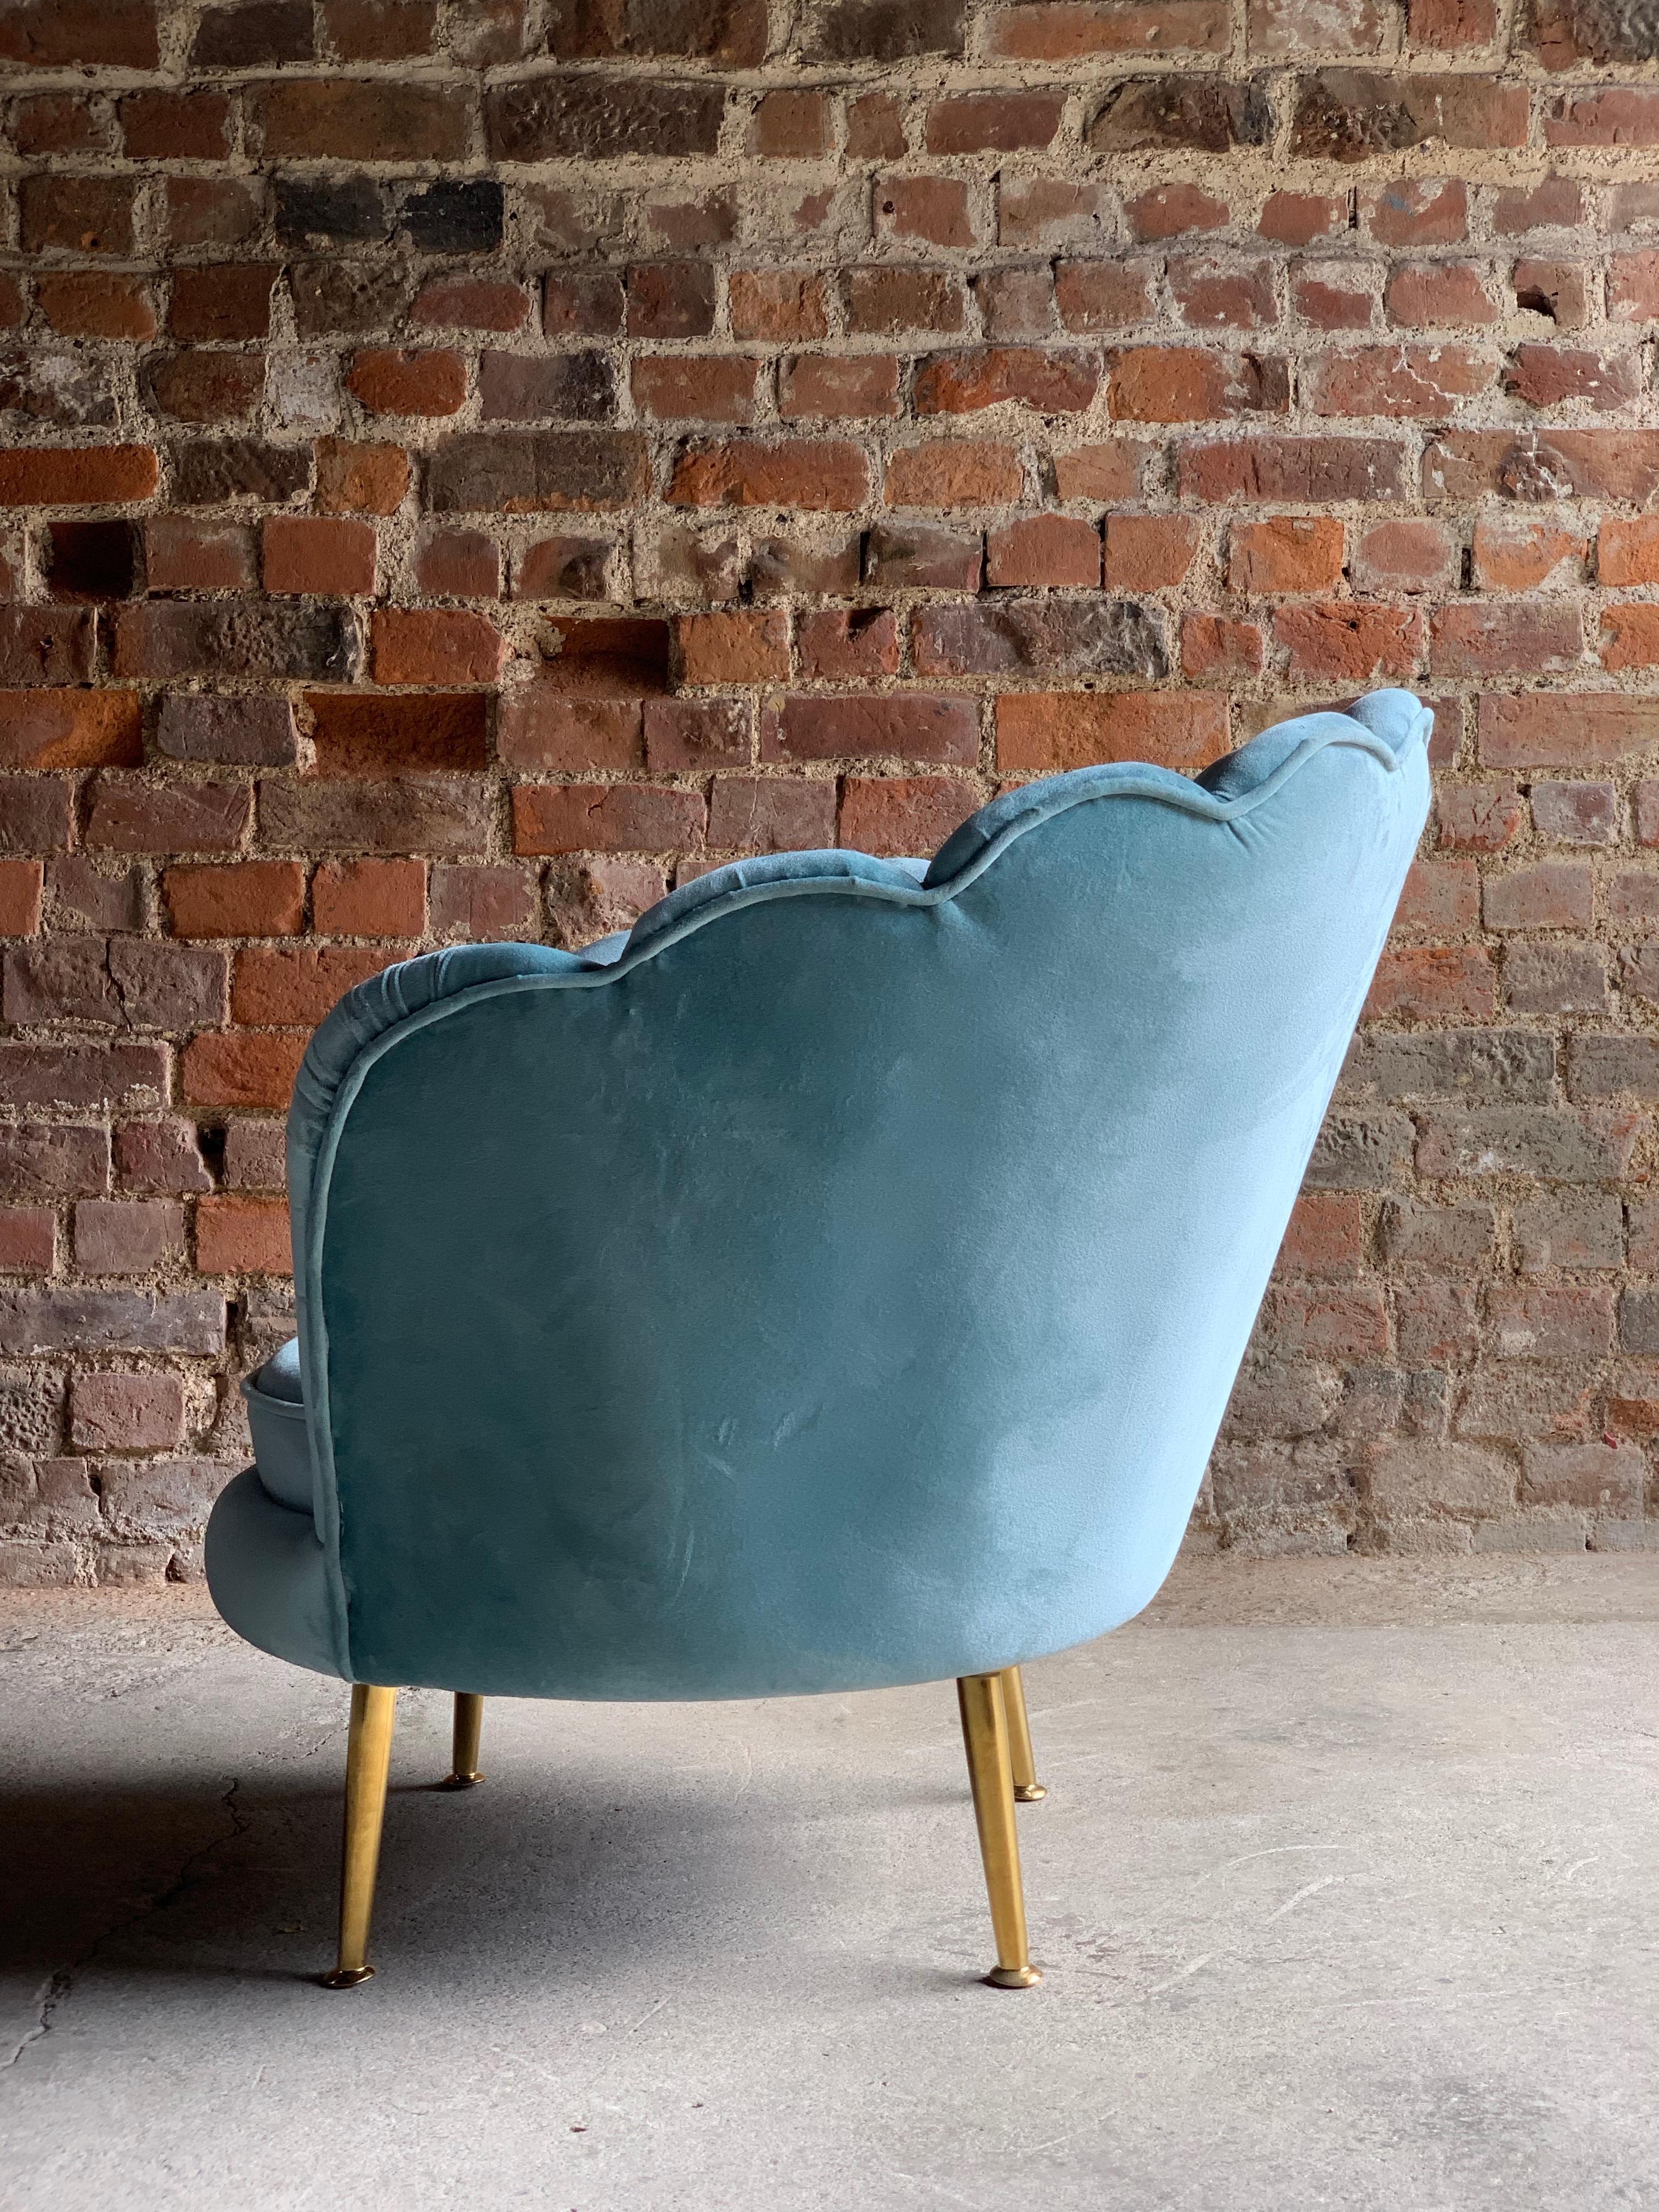 Art Deco Boudoir Cocktail Chair in Turquoise Velvet 1920s Style In Good Condition In Longdon, Tewkesbury